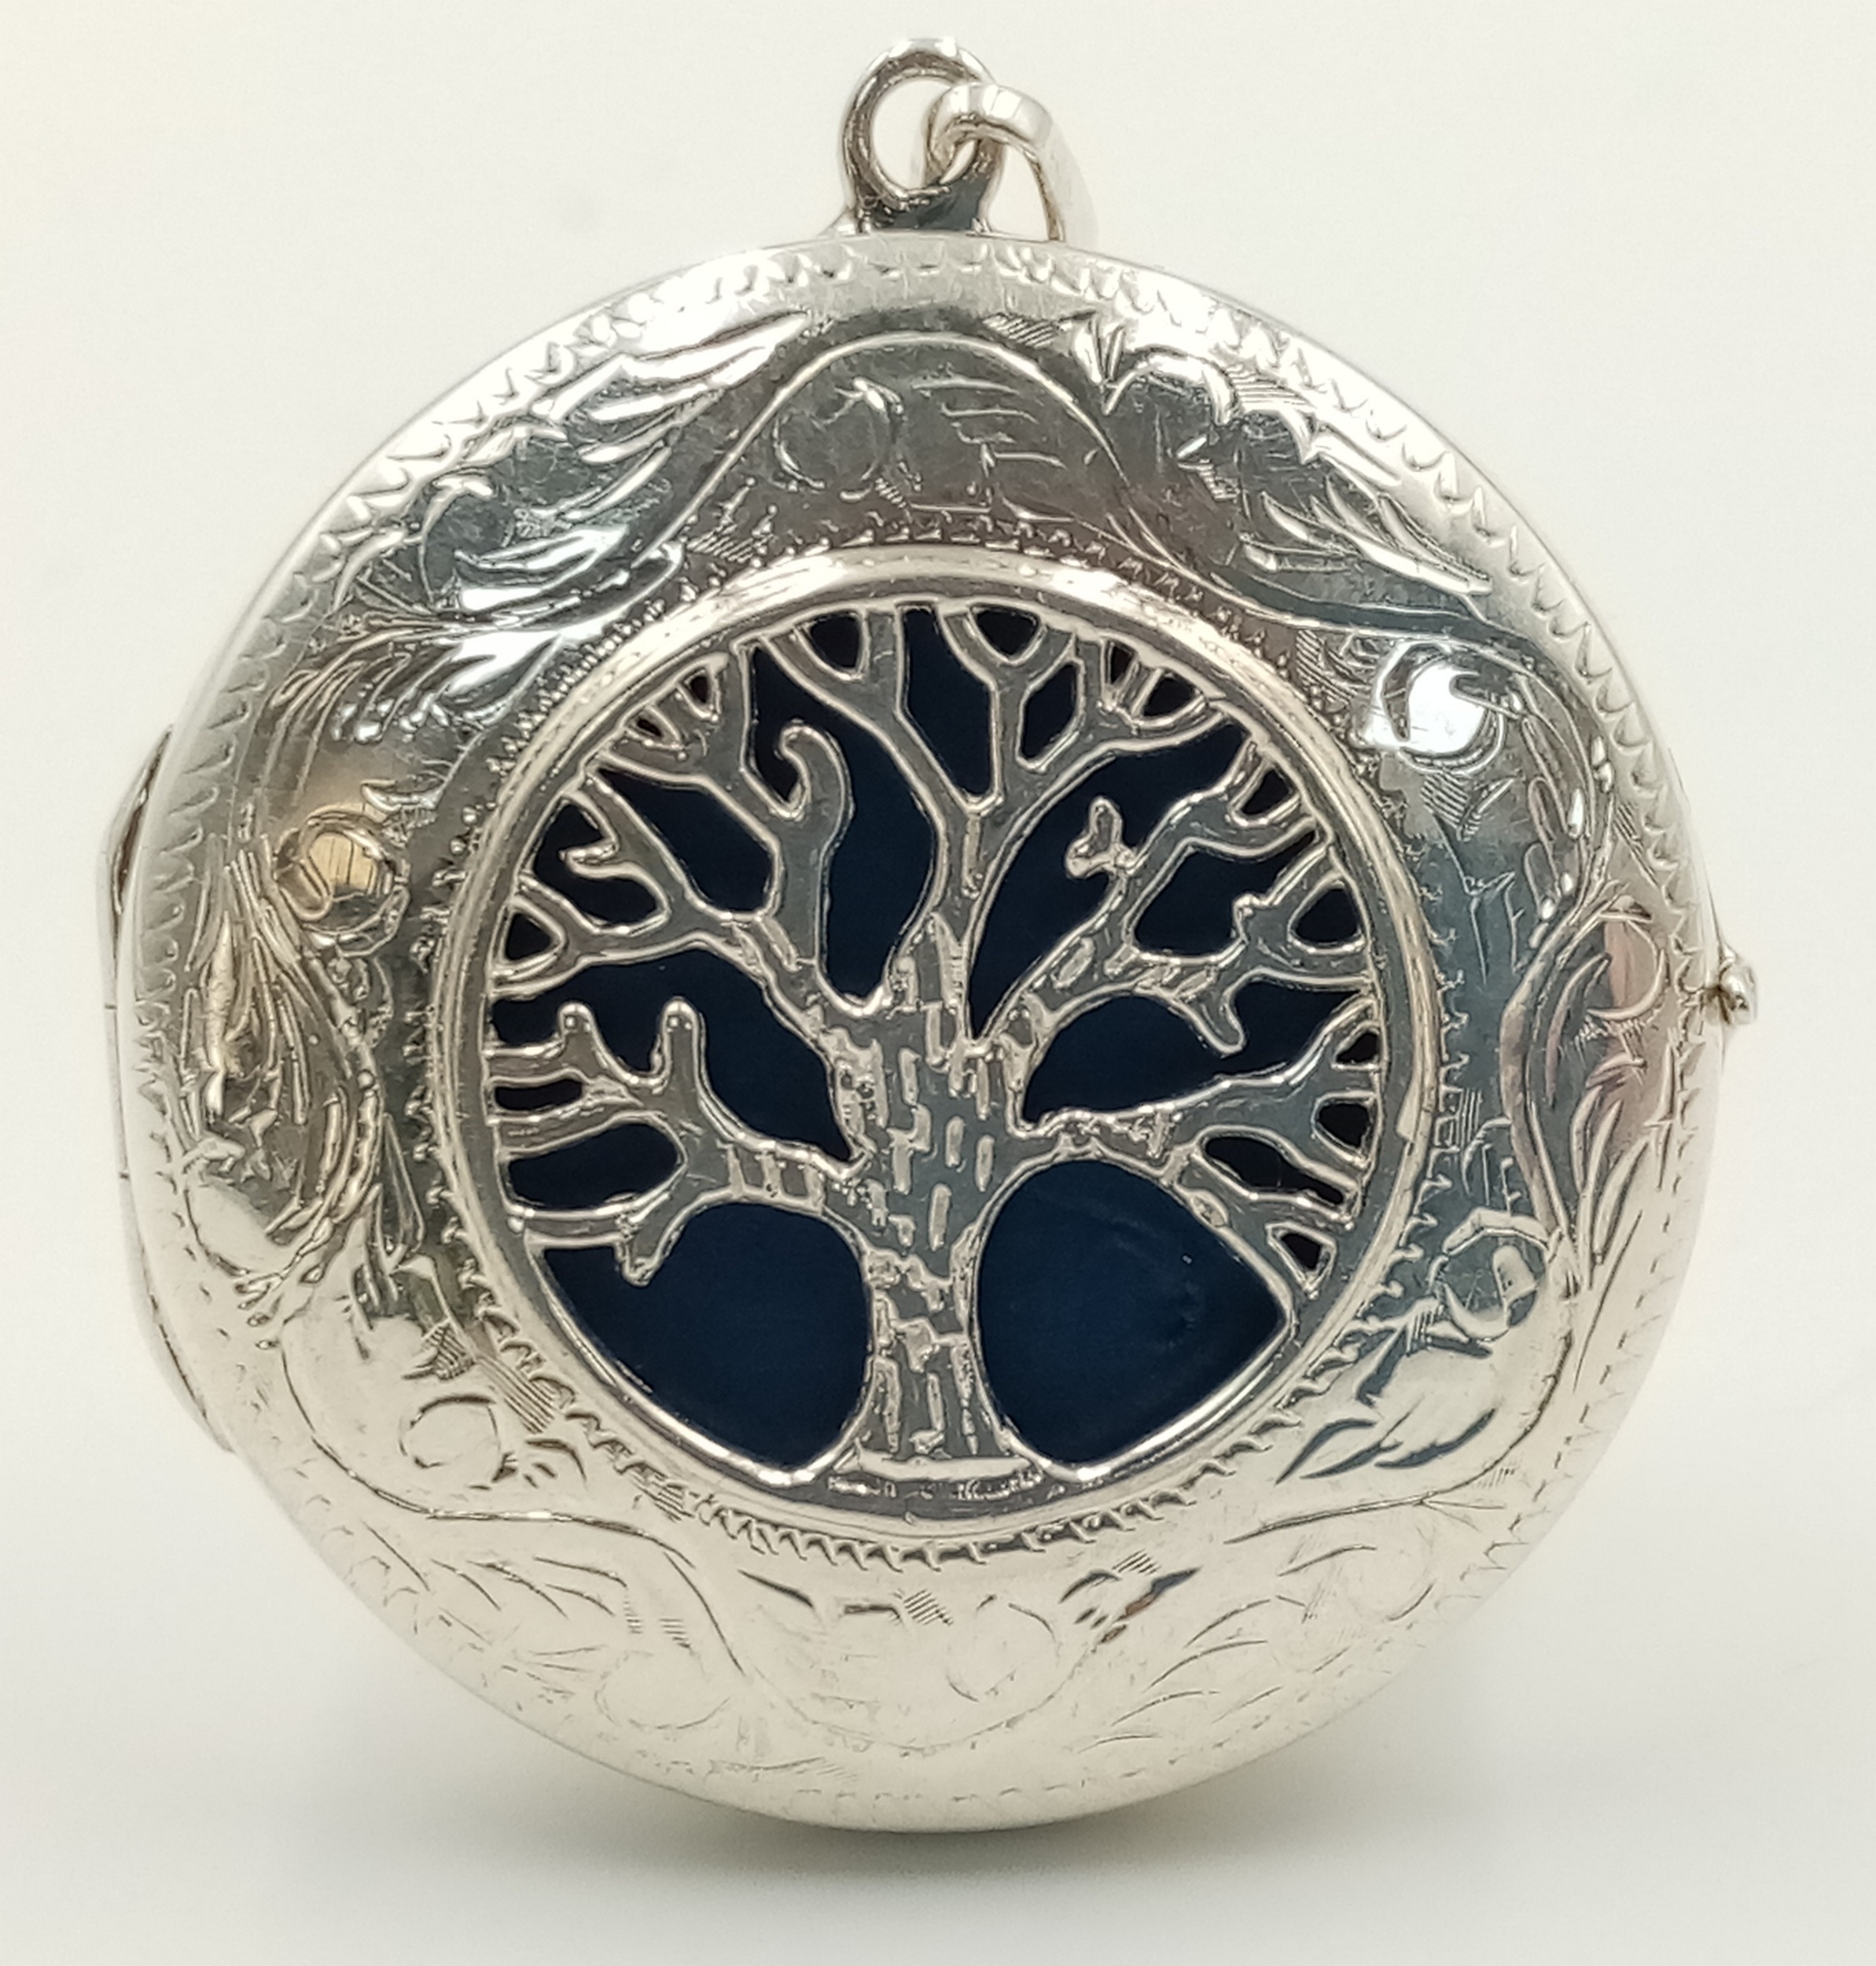 A STERLING SILVER TREE OF LIFE LOCKET. 4.4cm length, 10.6g total weight. Ref: SC 8092